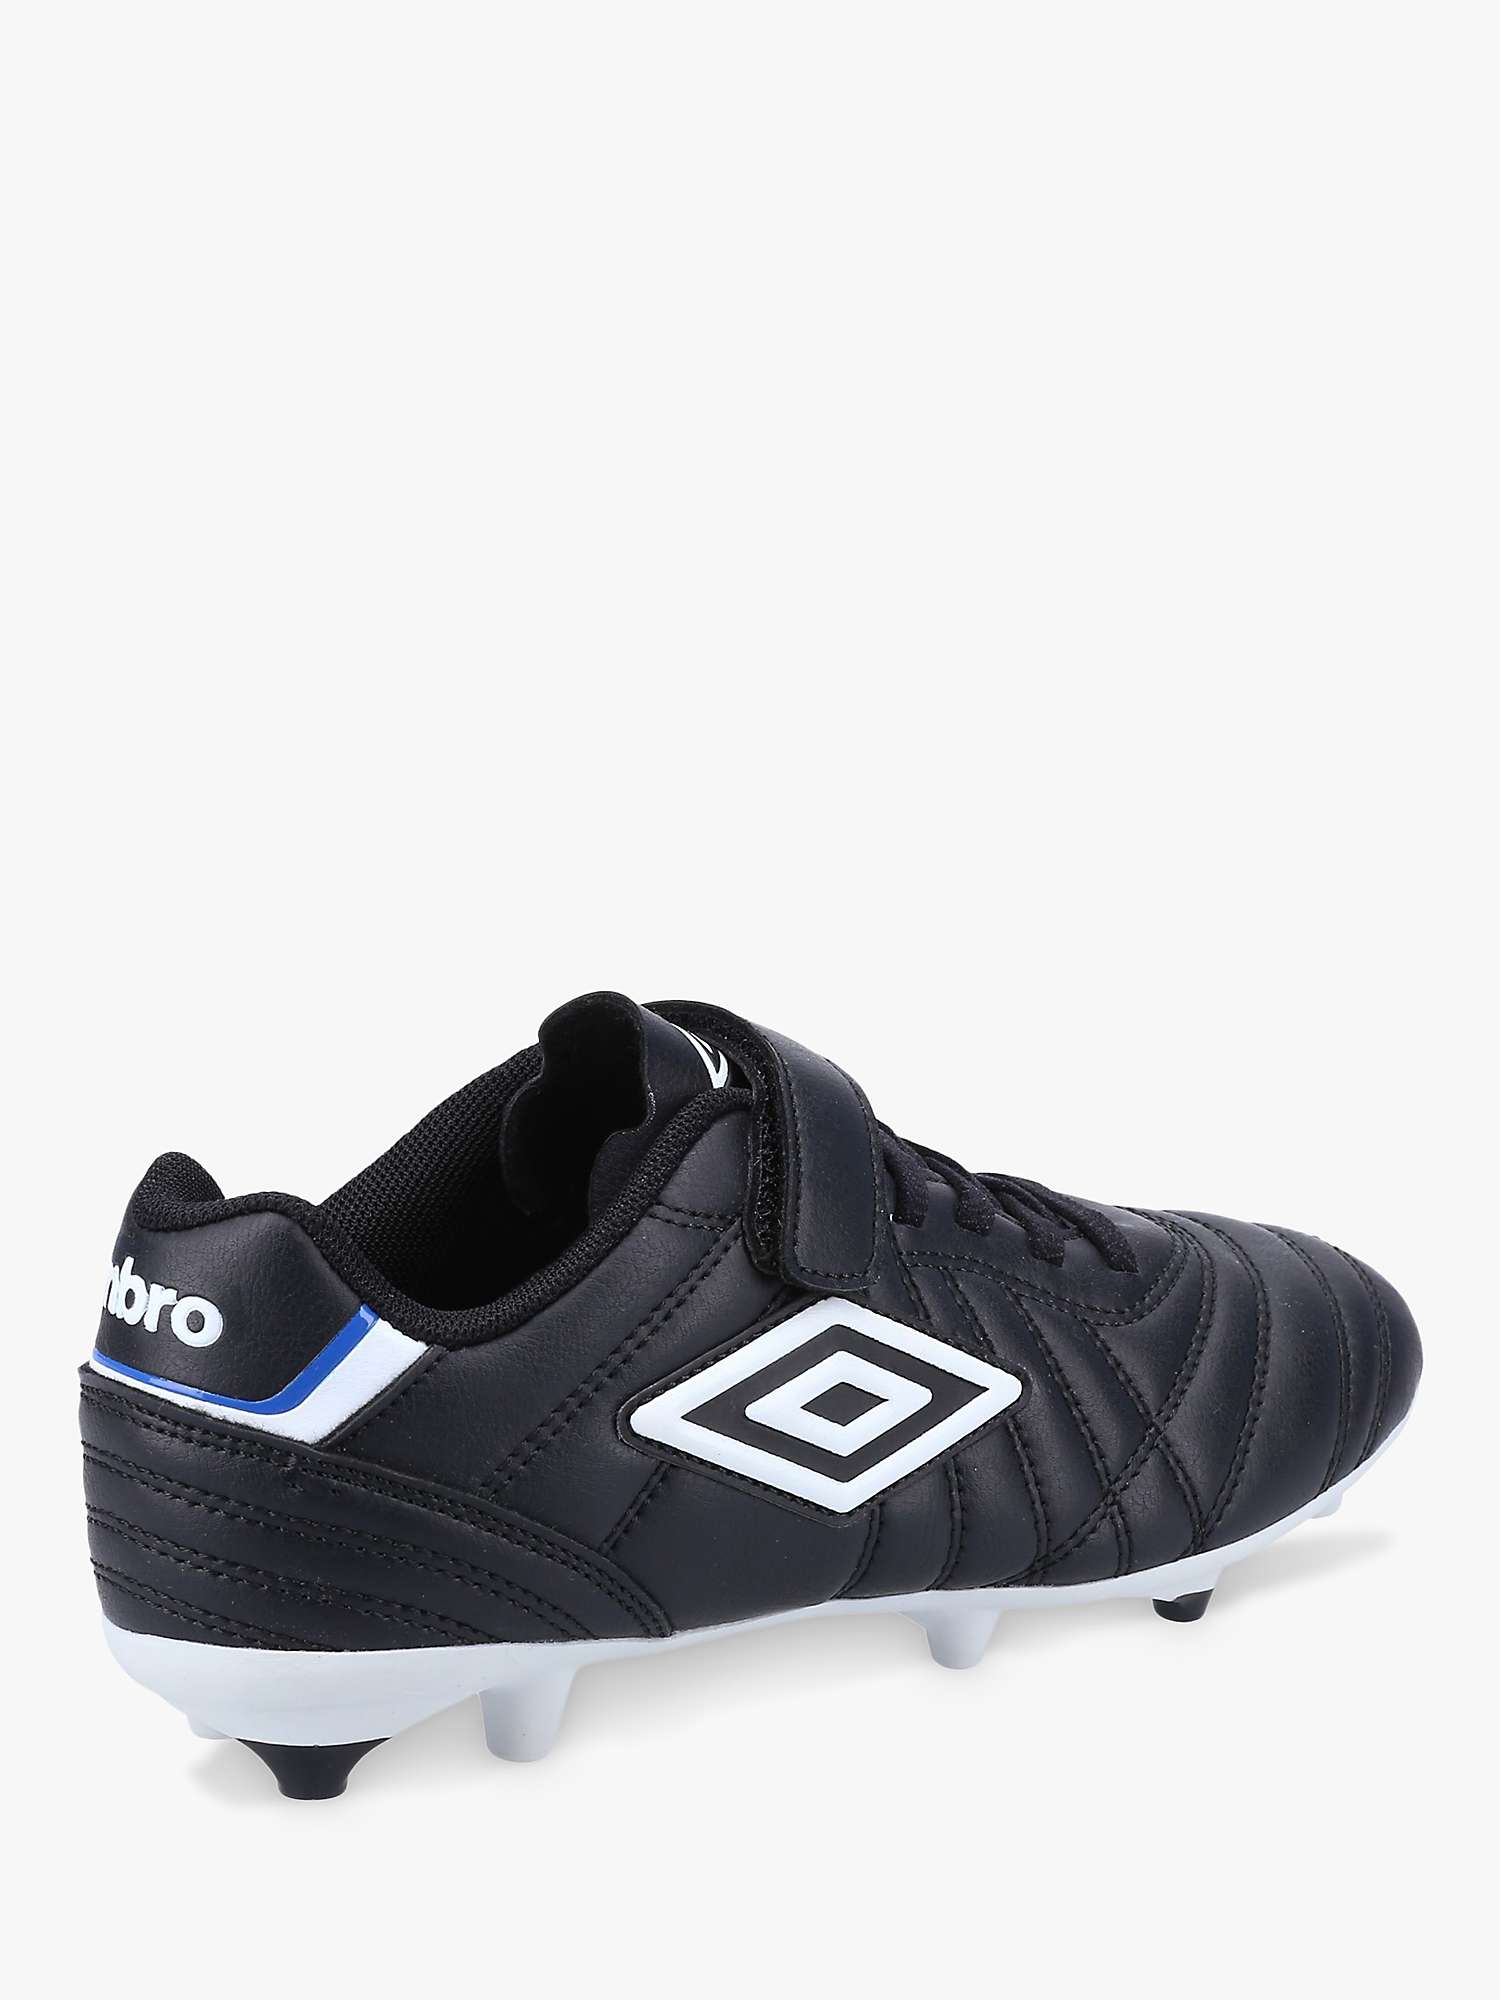 Buy Umbro Speciali Liga Firm Ground Football Boots Online at johnlewis.com